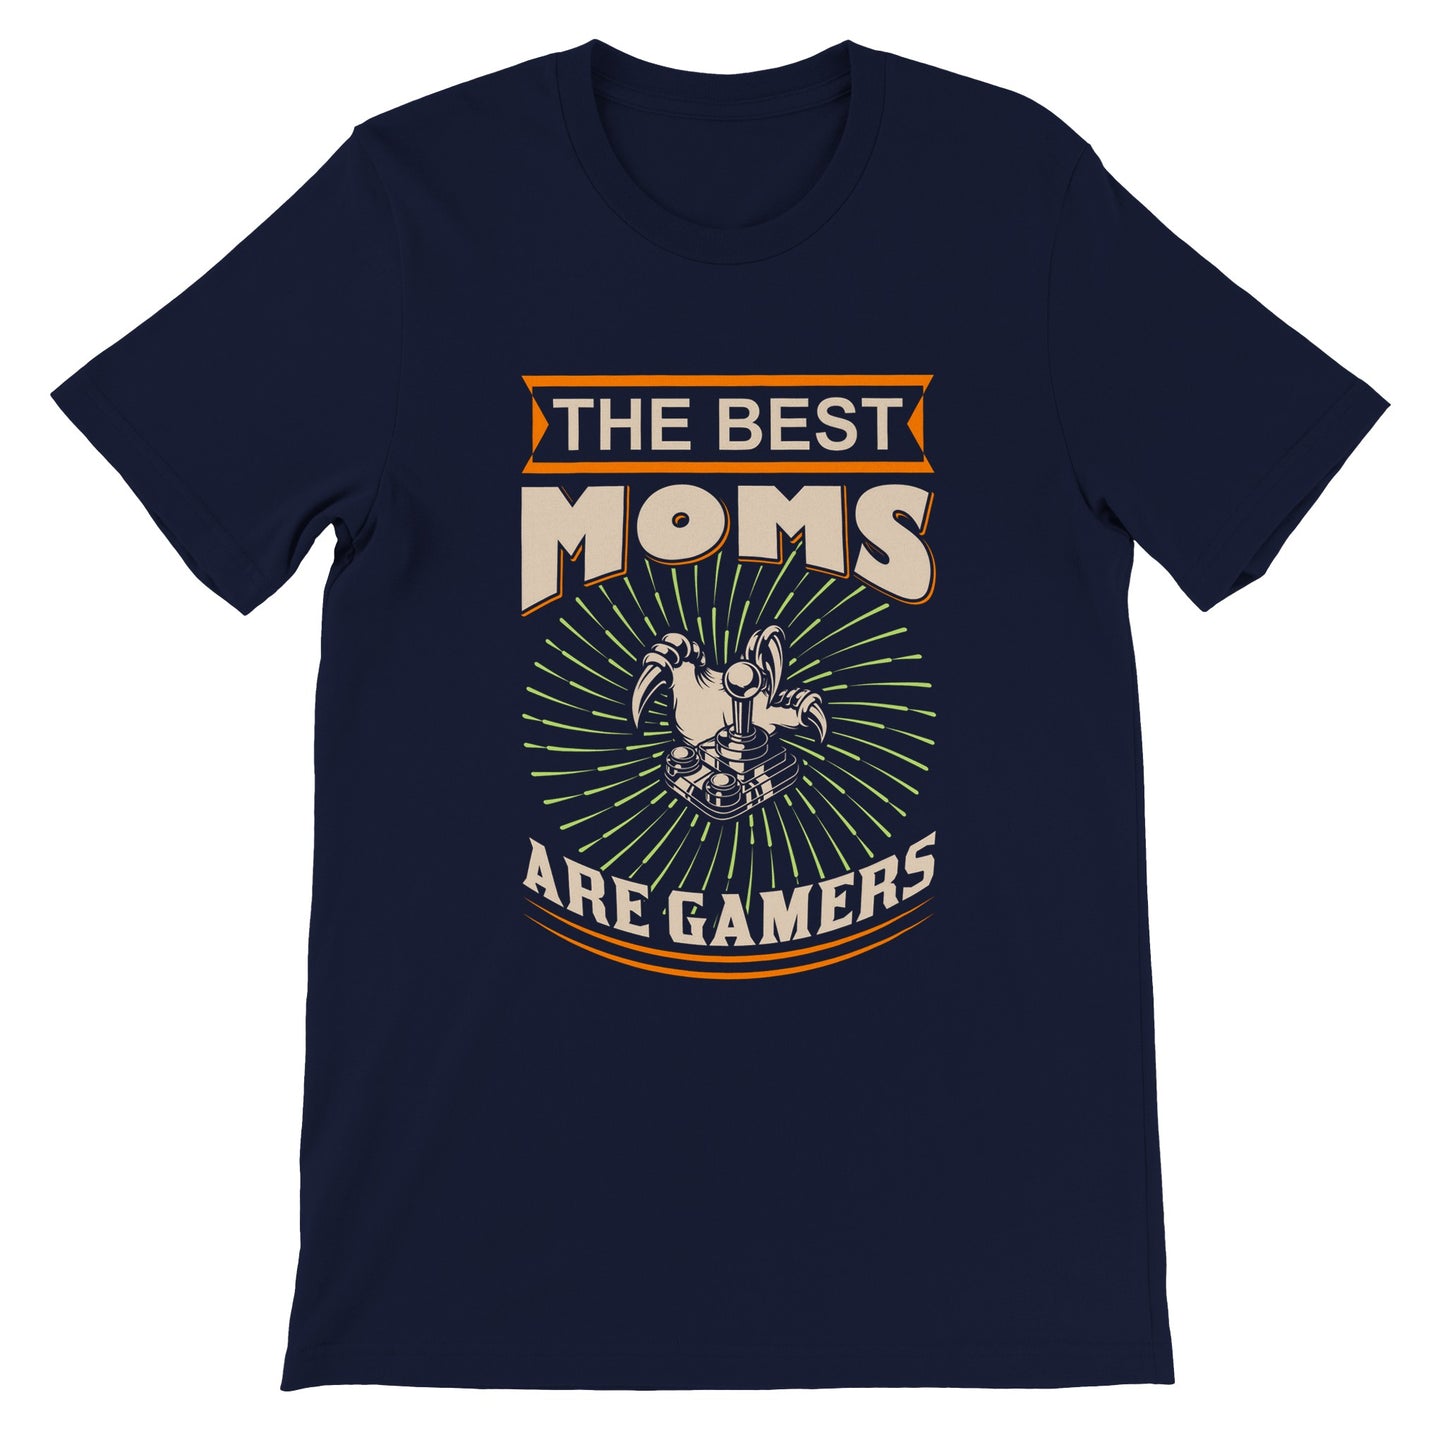 Gaming T-shirts - The Best Moms Are Gamers - Premium Unisex T-shirt